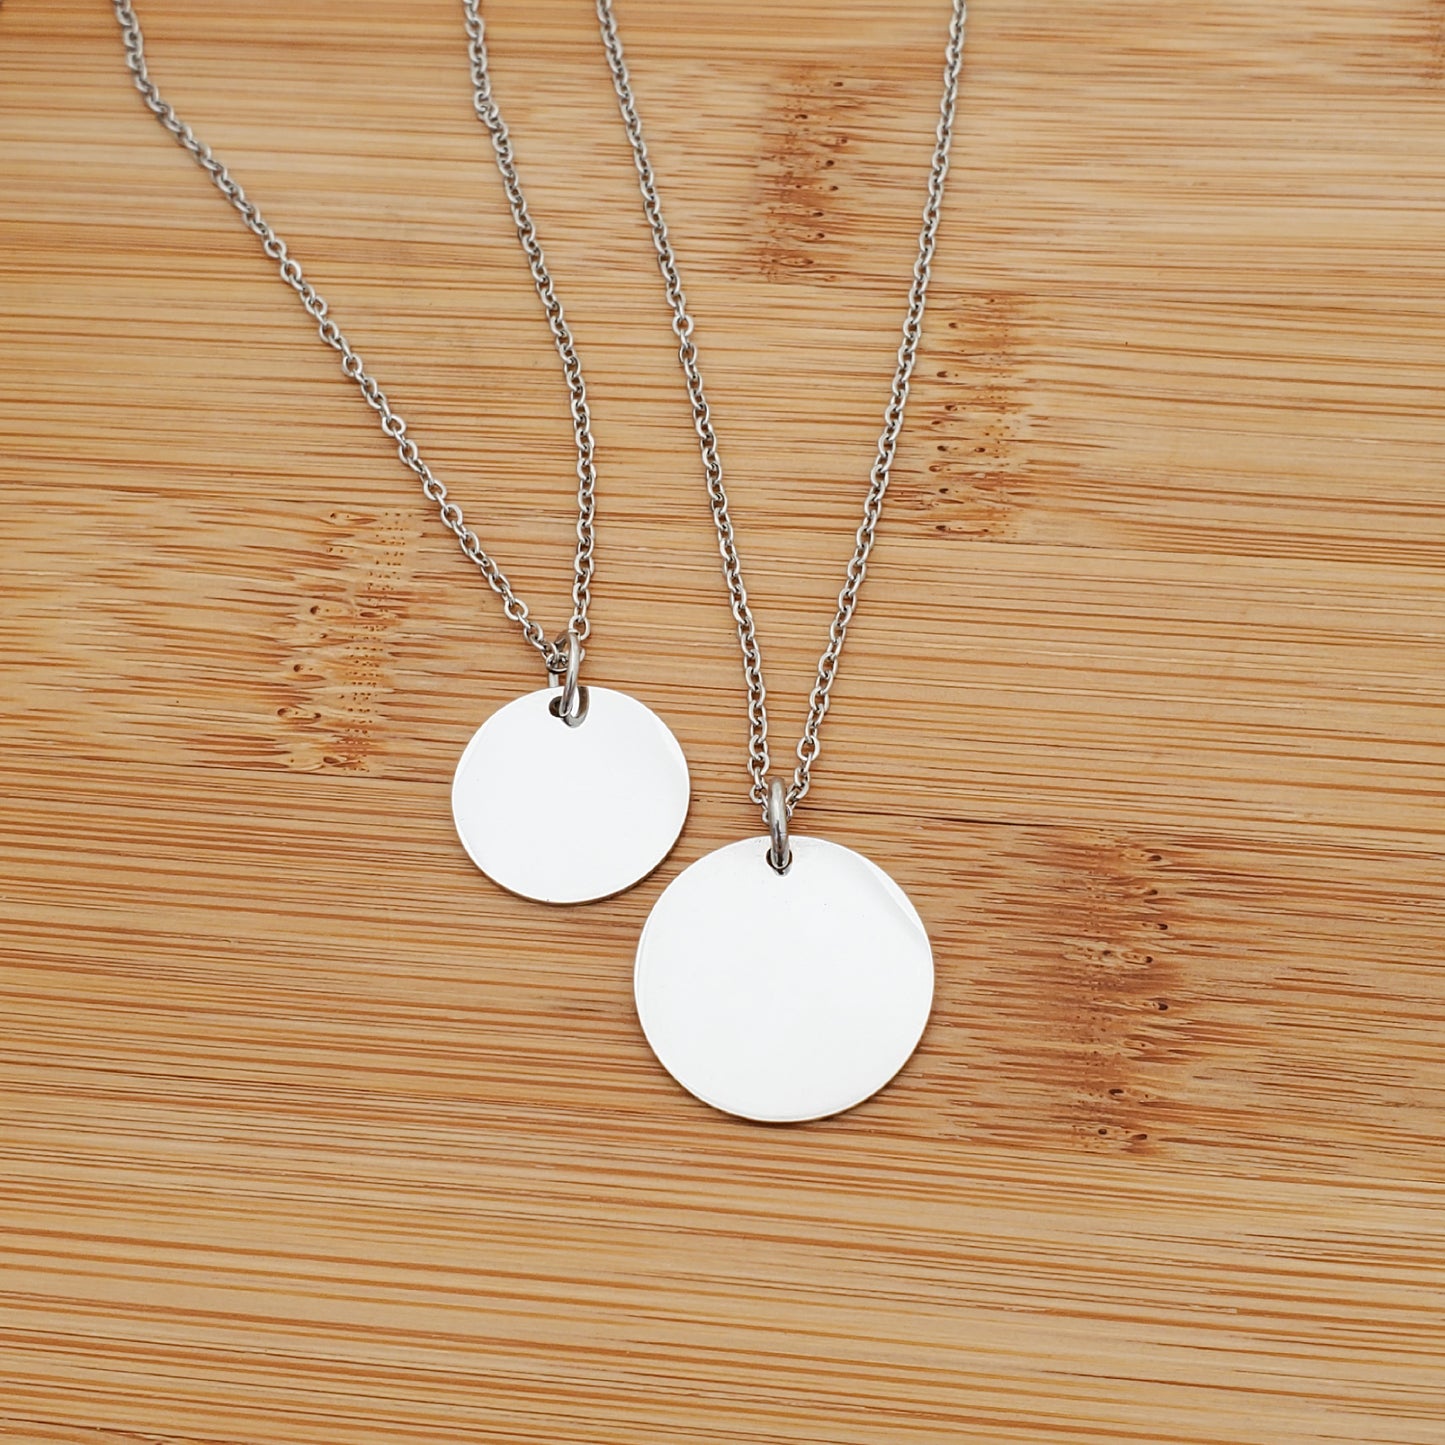 SPOTIFY CODE COIN NECKLACE